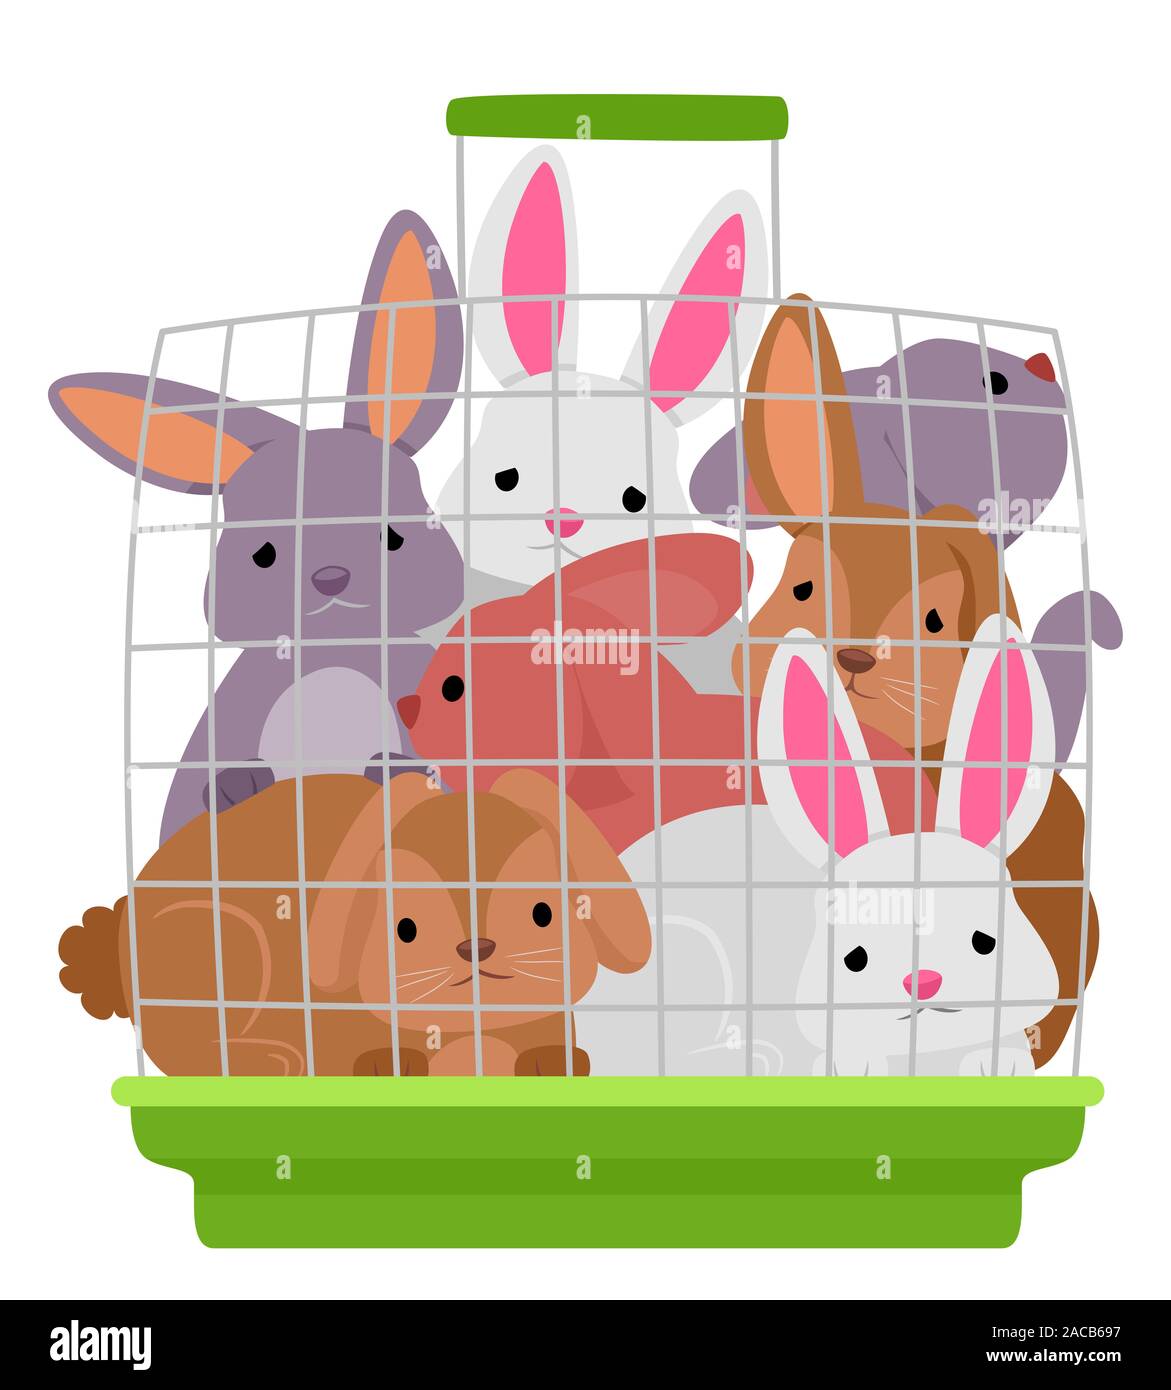 Illustration of Several Rabbits Inside a Small Cage. Animal Abuse Stock Photo